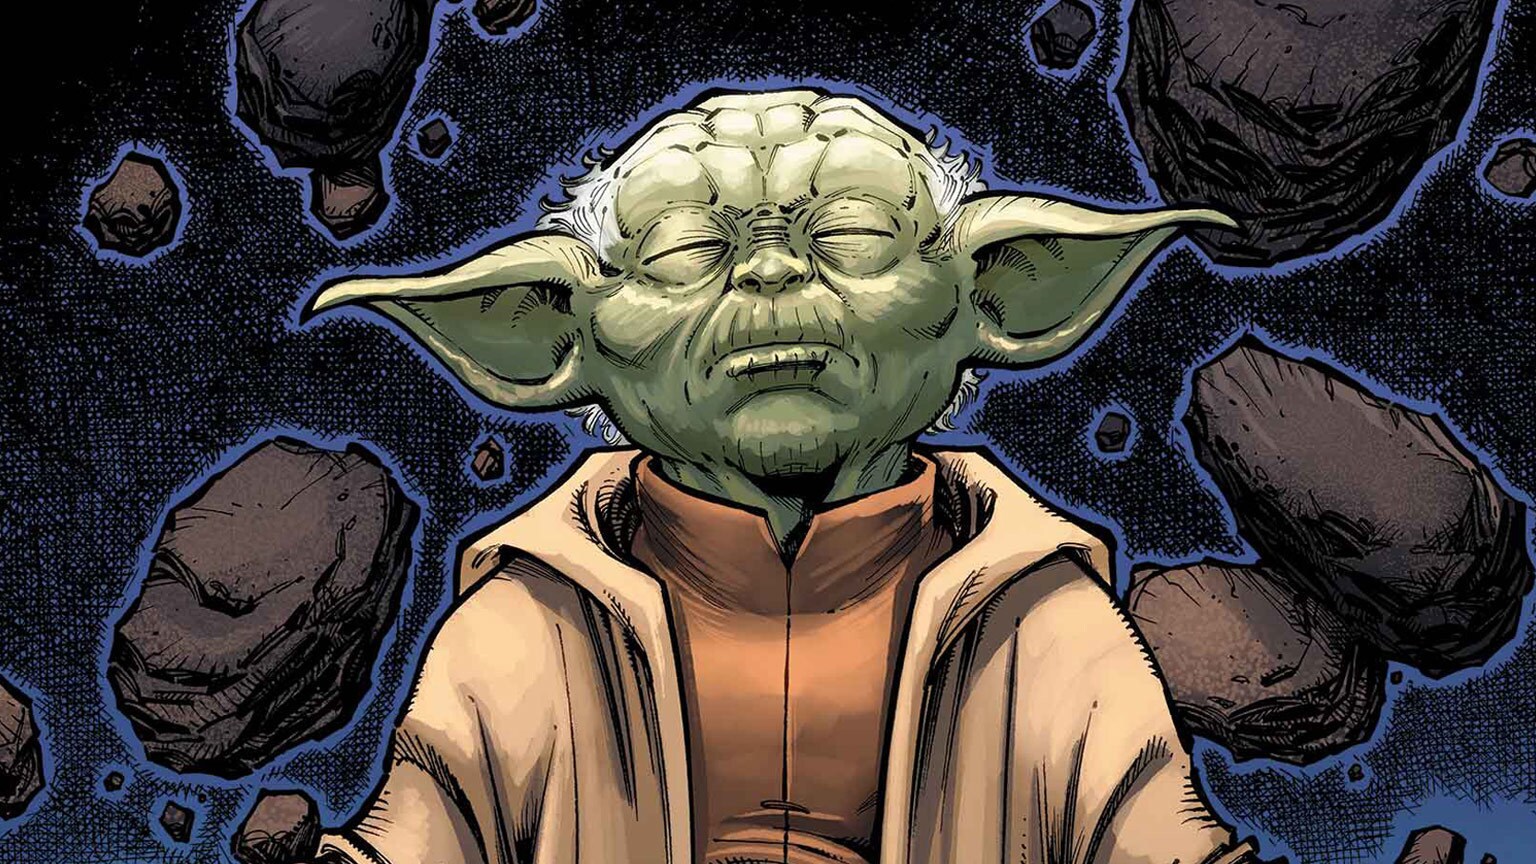 Yoda Goes to a Strange World and More from Marvel's December 2022 Star Wars Comics - Exclusive